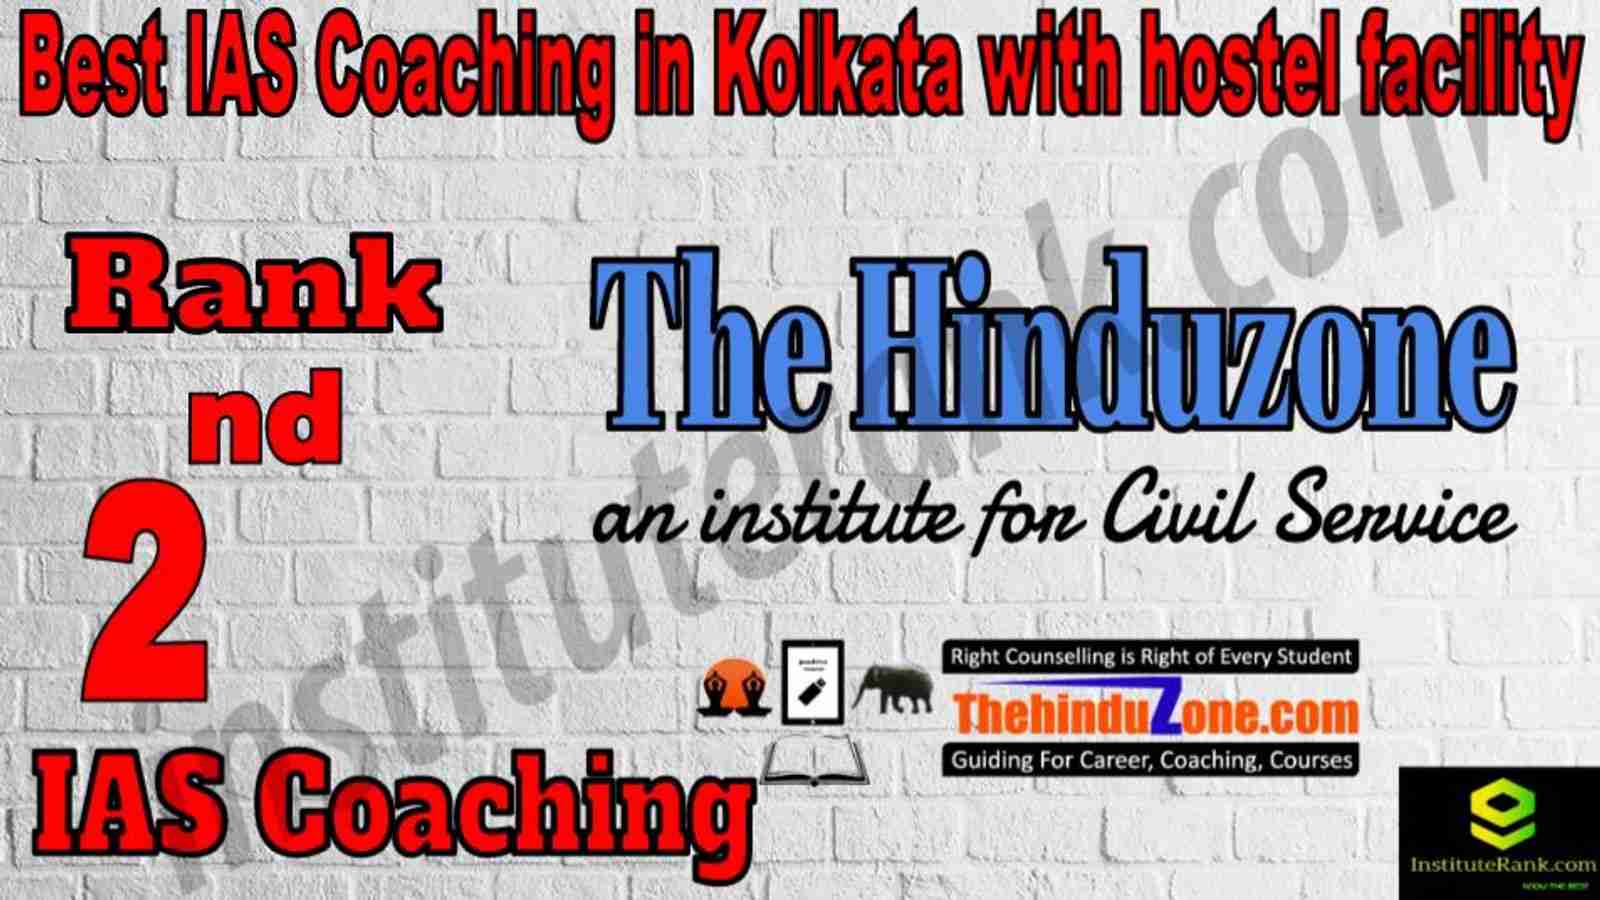 2nd Best IAS Coaching in Kolkata with hostel facility